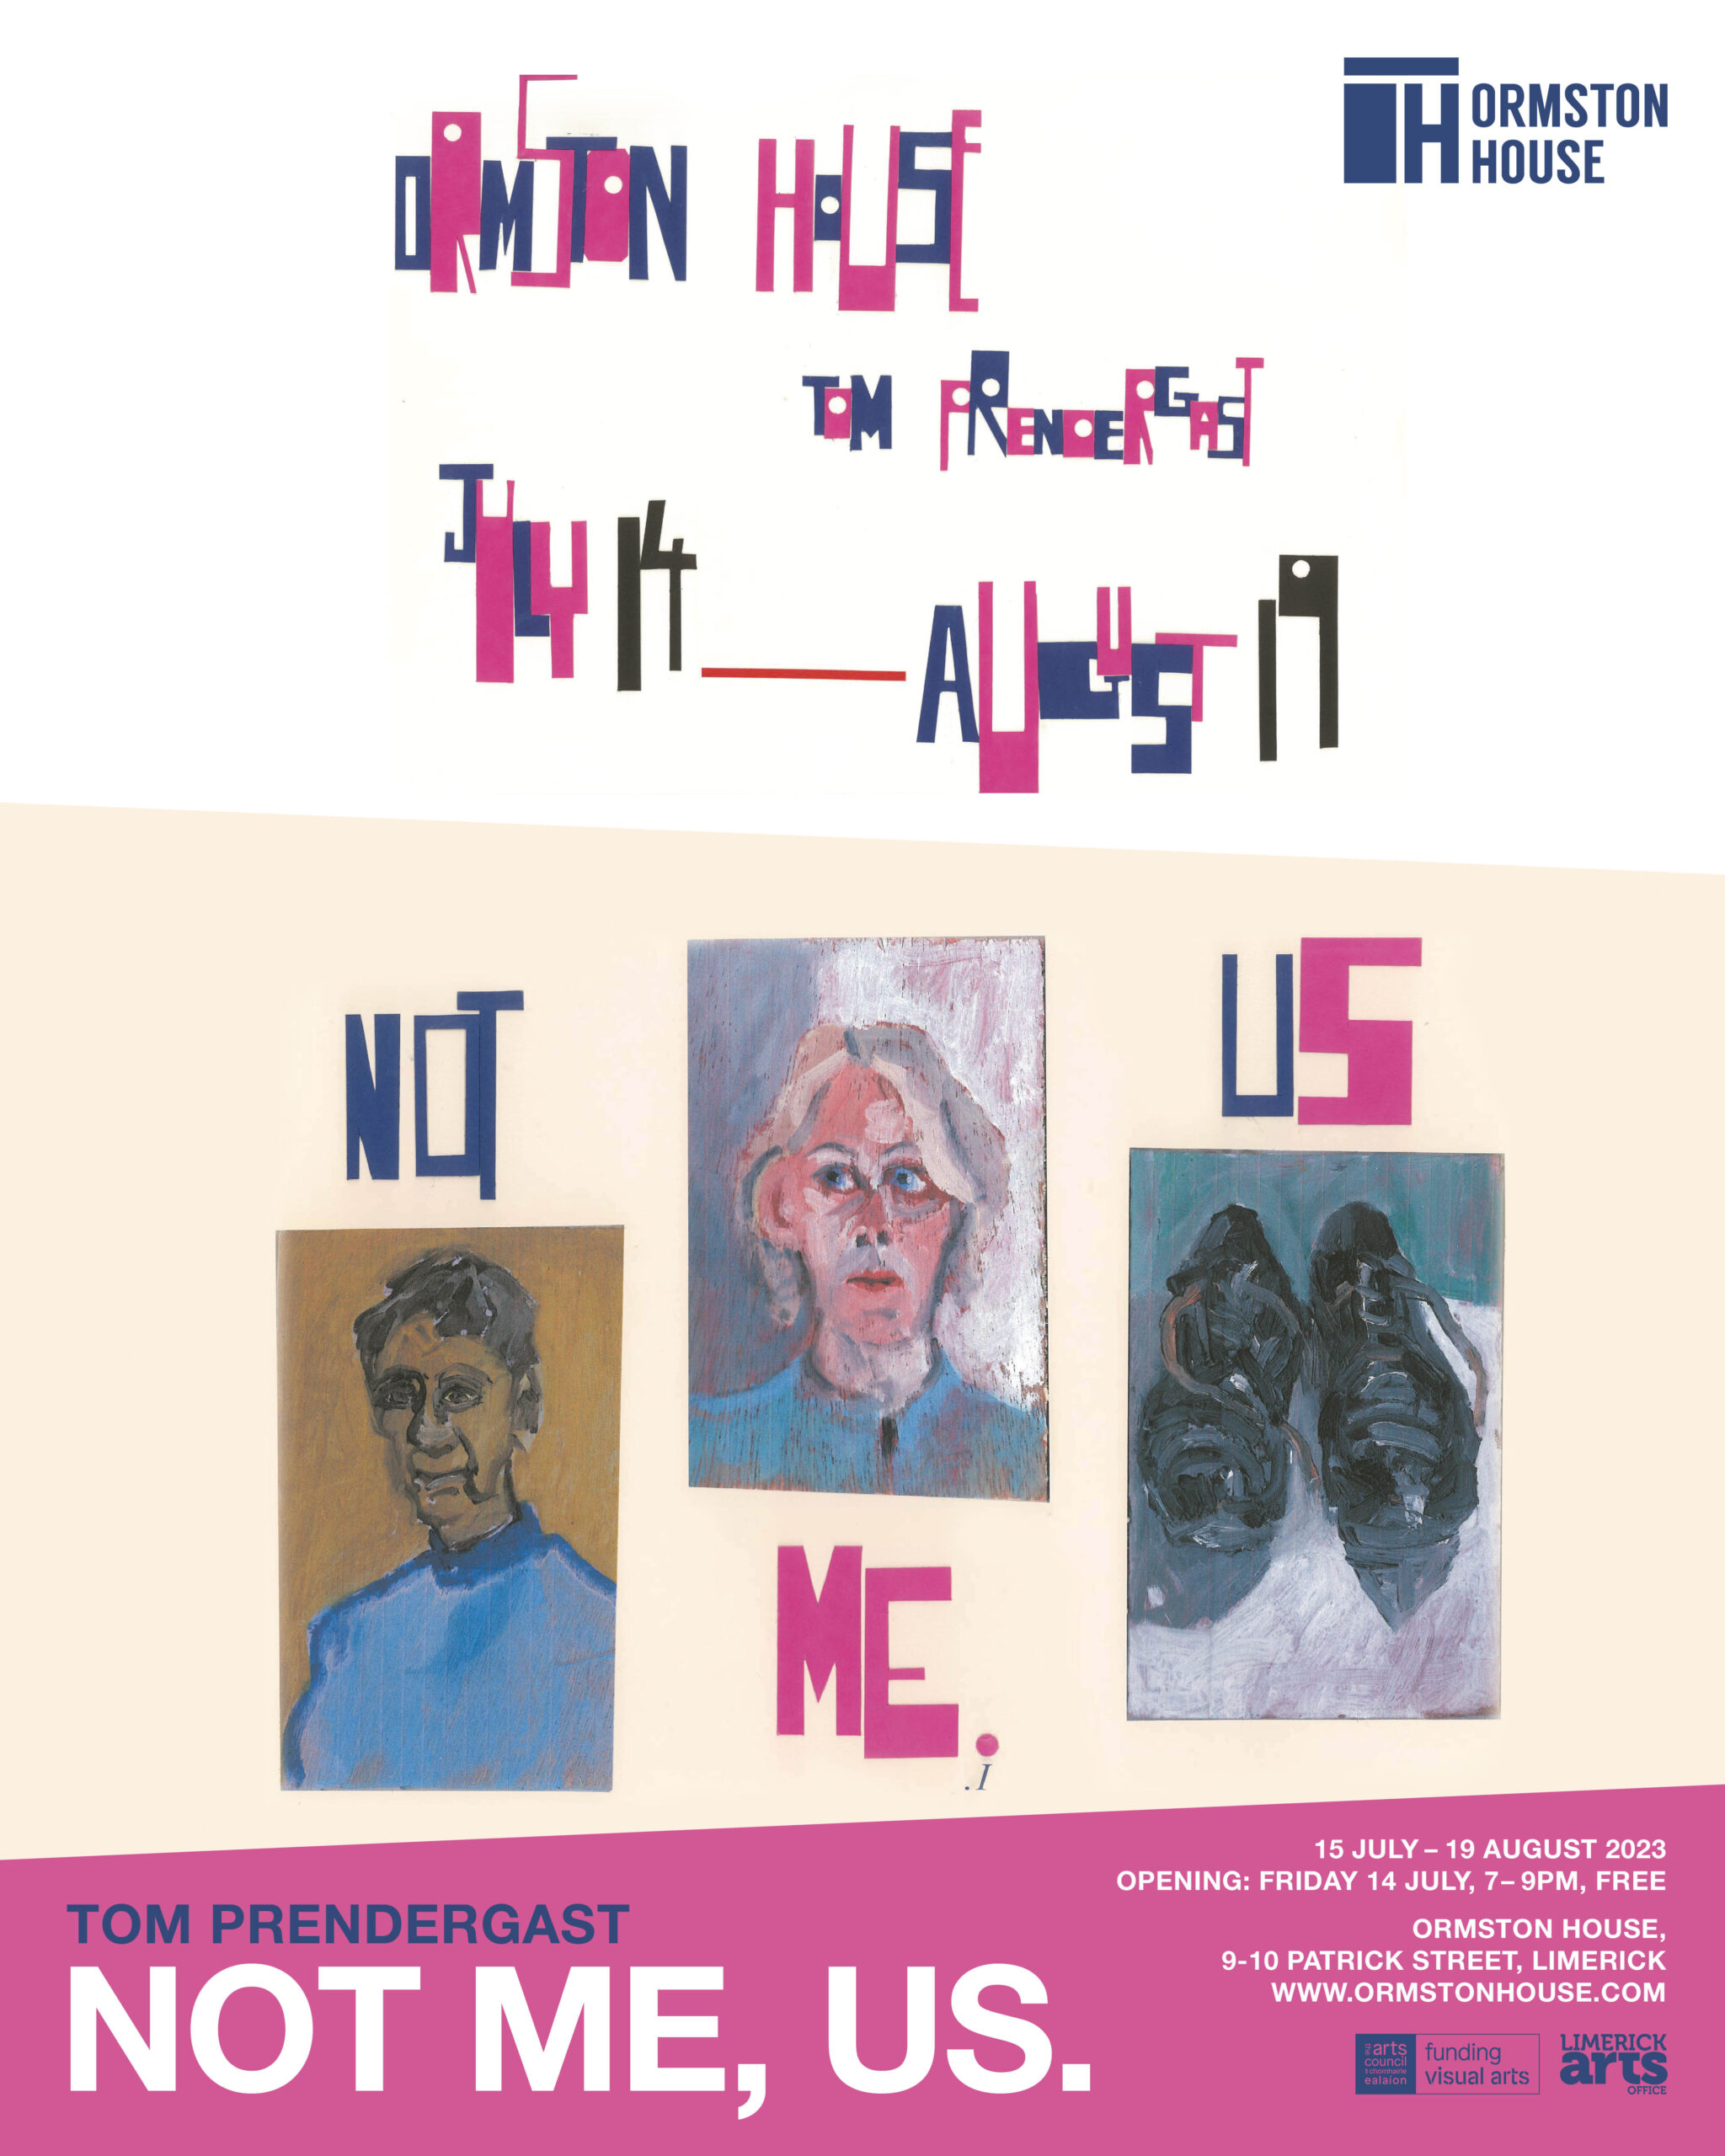 Tom Prendergast Not Me, Us. opens at Ormston House this July 14